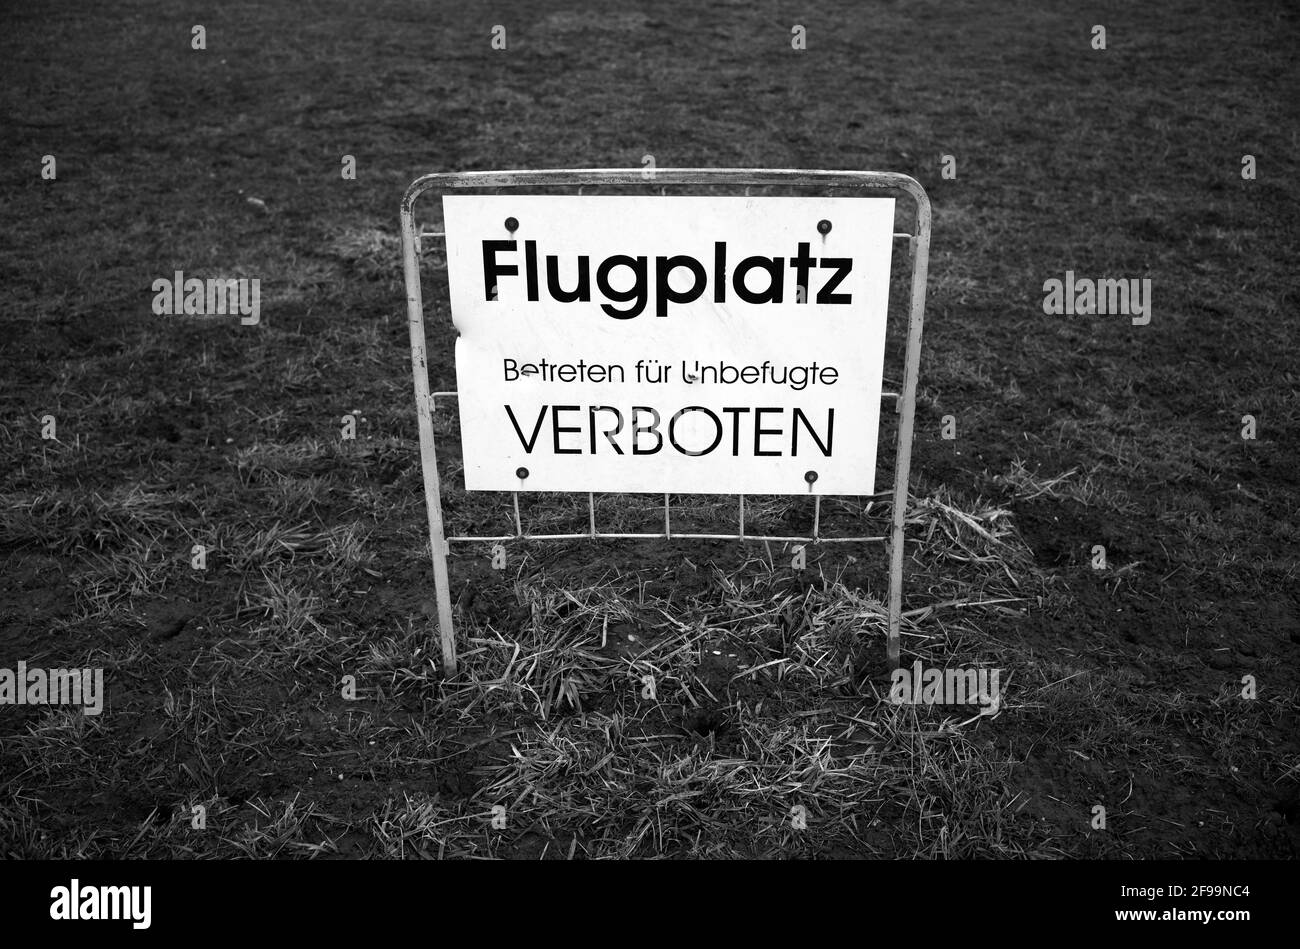 Airfield sign - NO ACCESSION FOR UNAUTHORIZED PEOPLE, Seißen, Blautal, Baden-Württemberg, Germany Stock Photo